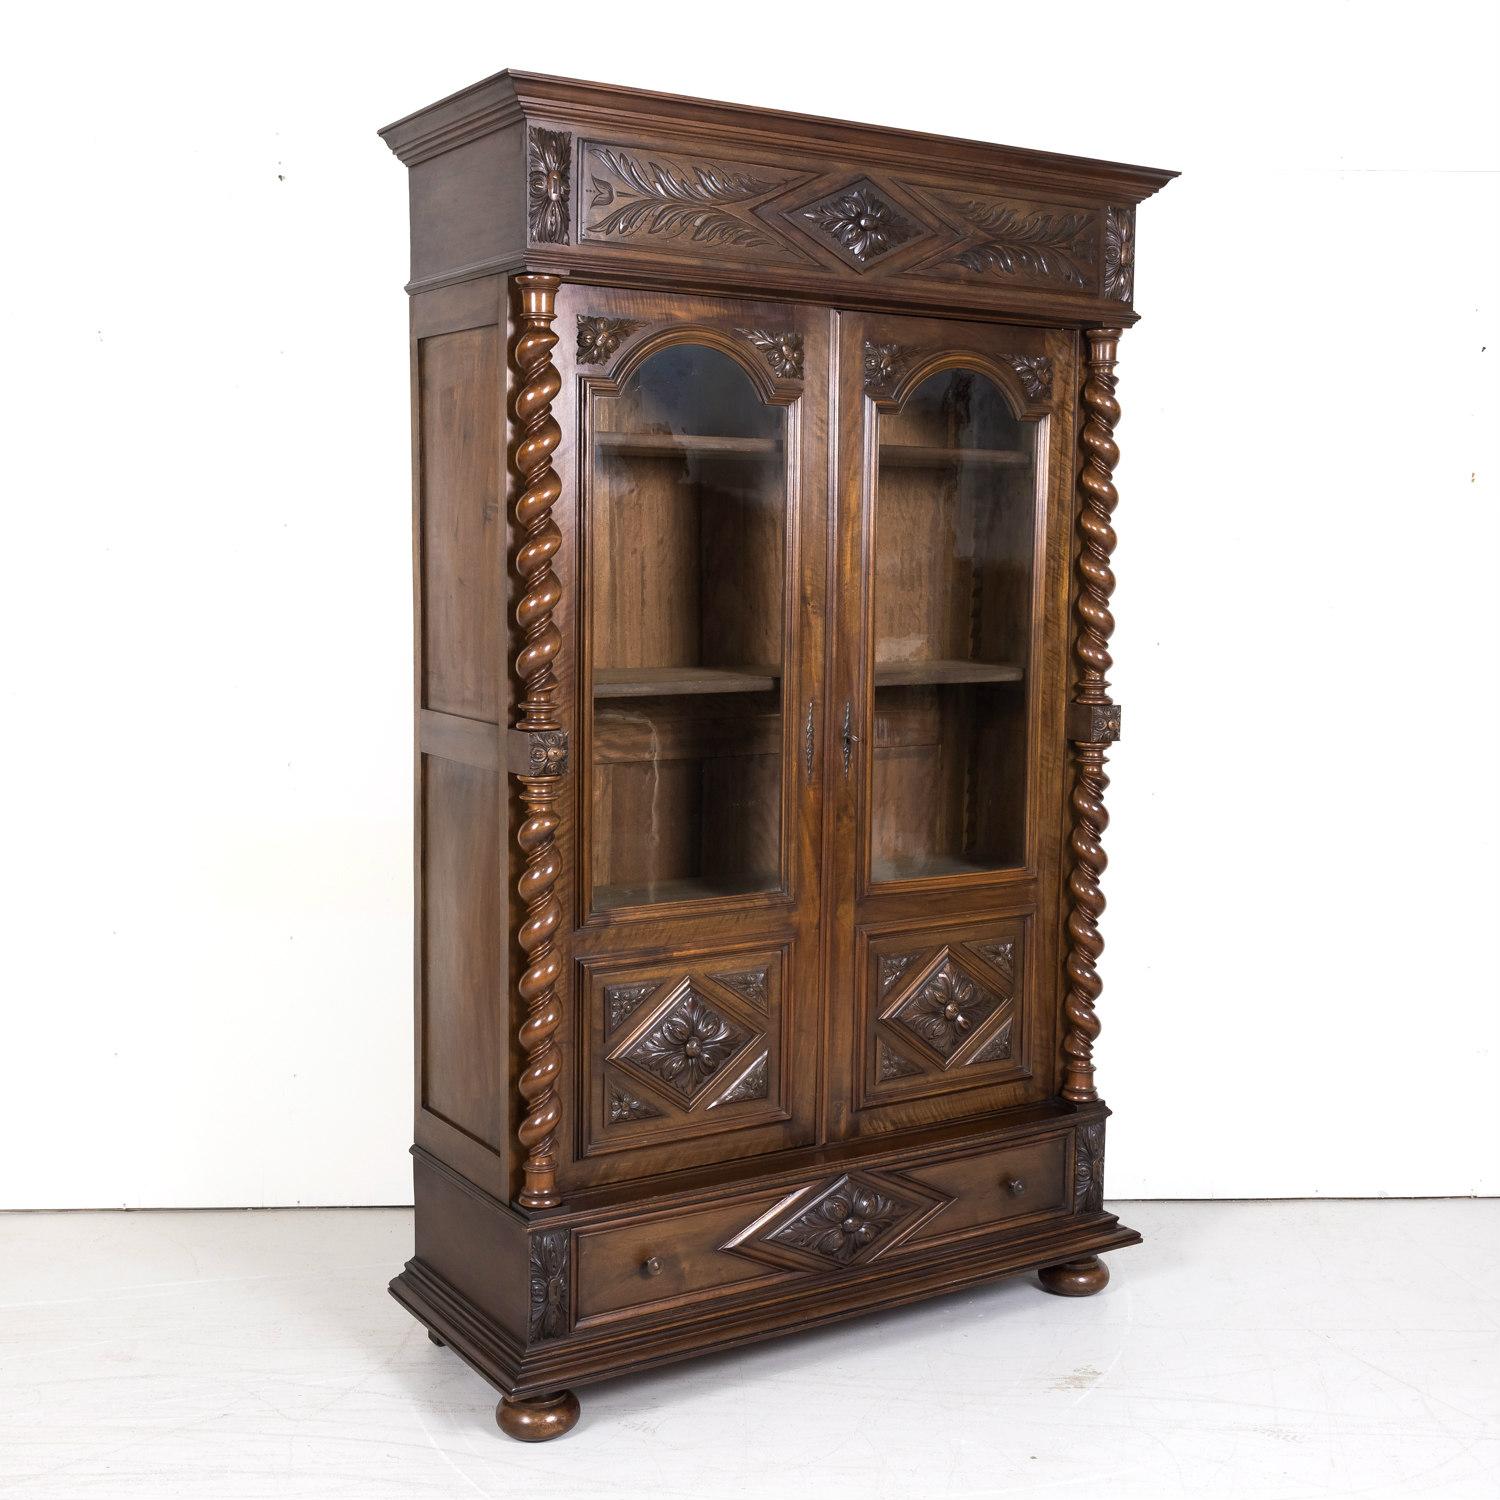 A handsome 19th century French Louis XIII style carved barley twist bibliothèque or bookcase handcrafted in Lyon of solid walnut, circa 1890s, having a stepped cornice over a carved frieze above a pair of three-quarter glass paneled doors with